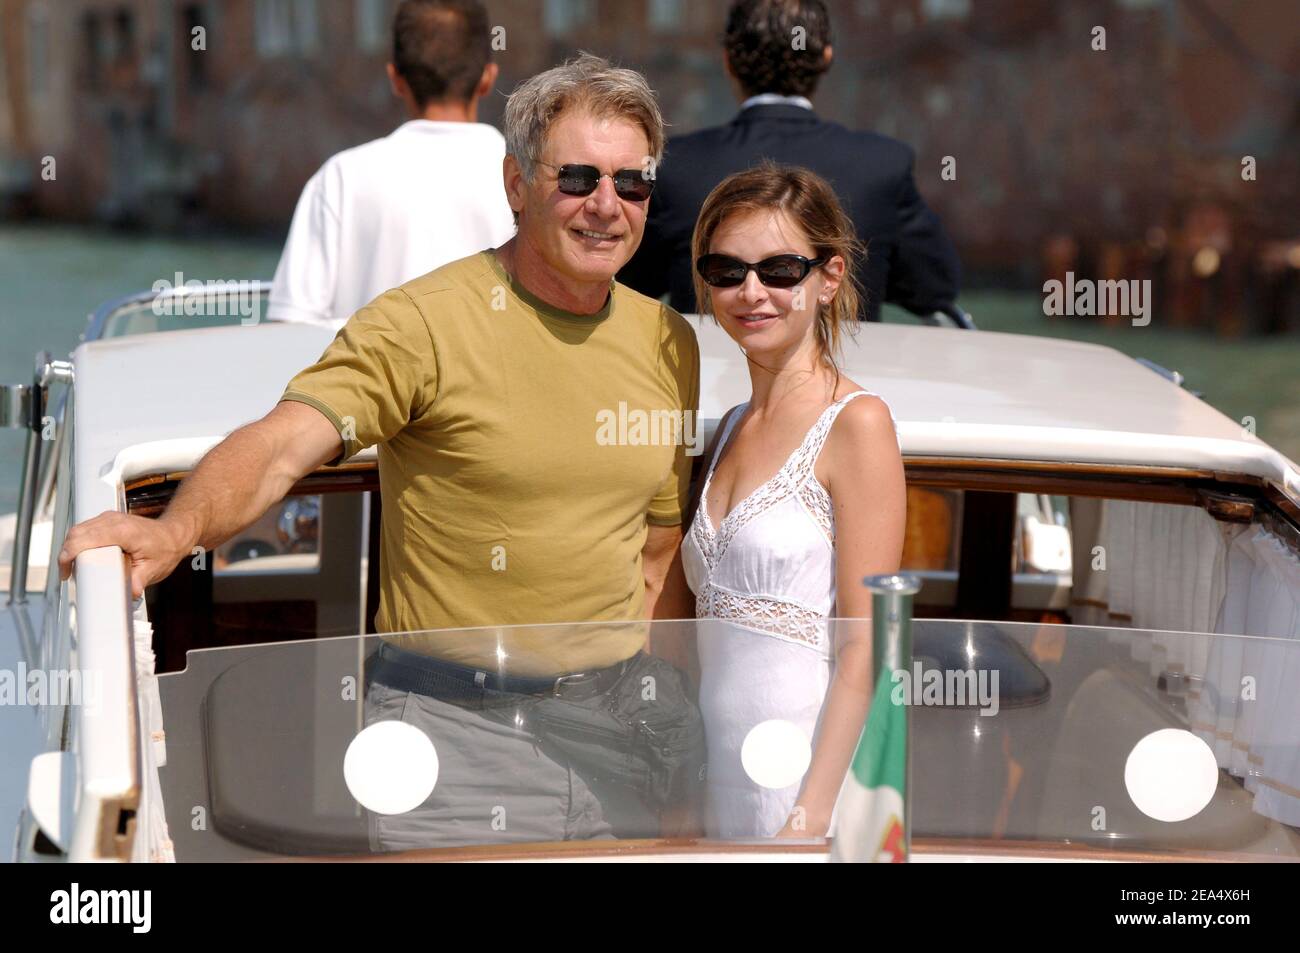 Harrison Ford and his girlfriend Calista Flockhart have fun on a Taxi Boat during the 62nd Venice Film Festival in Venice, Italy, on September 1, 2005. Photo by Lionel Hahn/ABACAPRESS.COM. Stock Photo